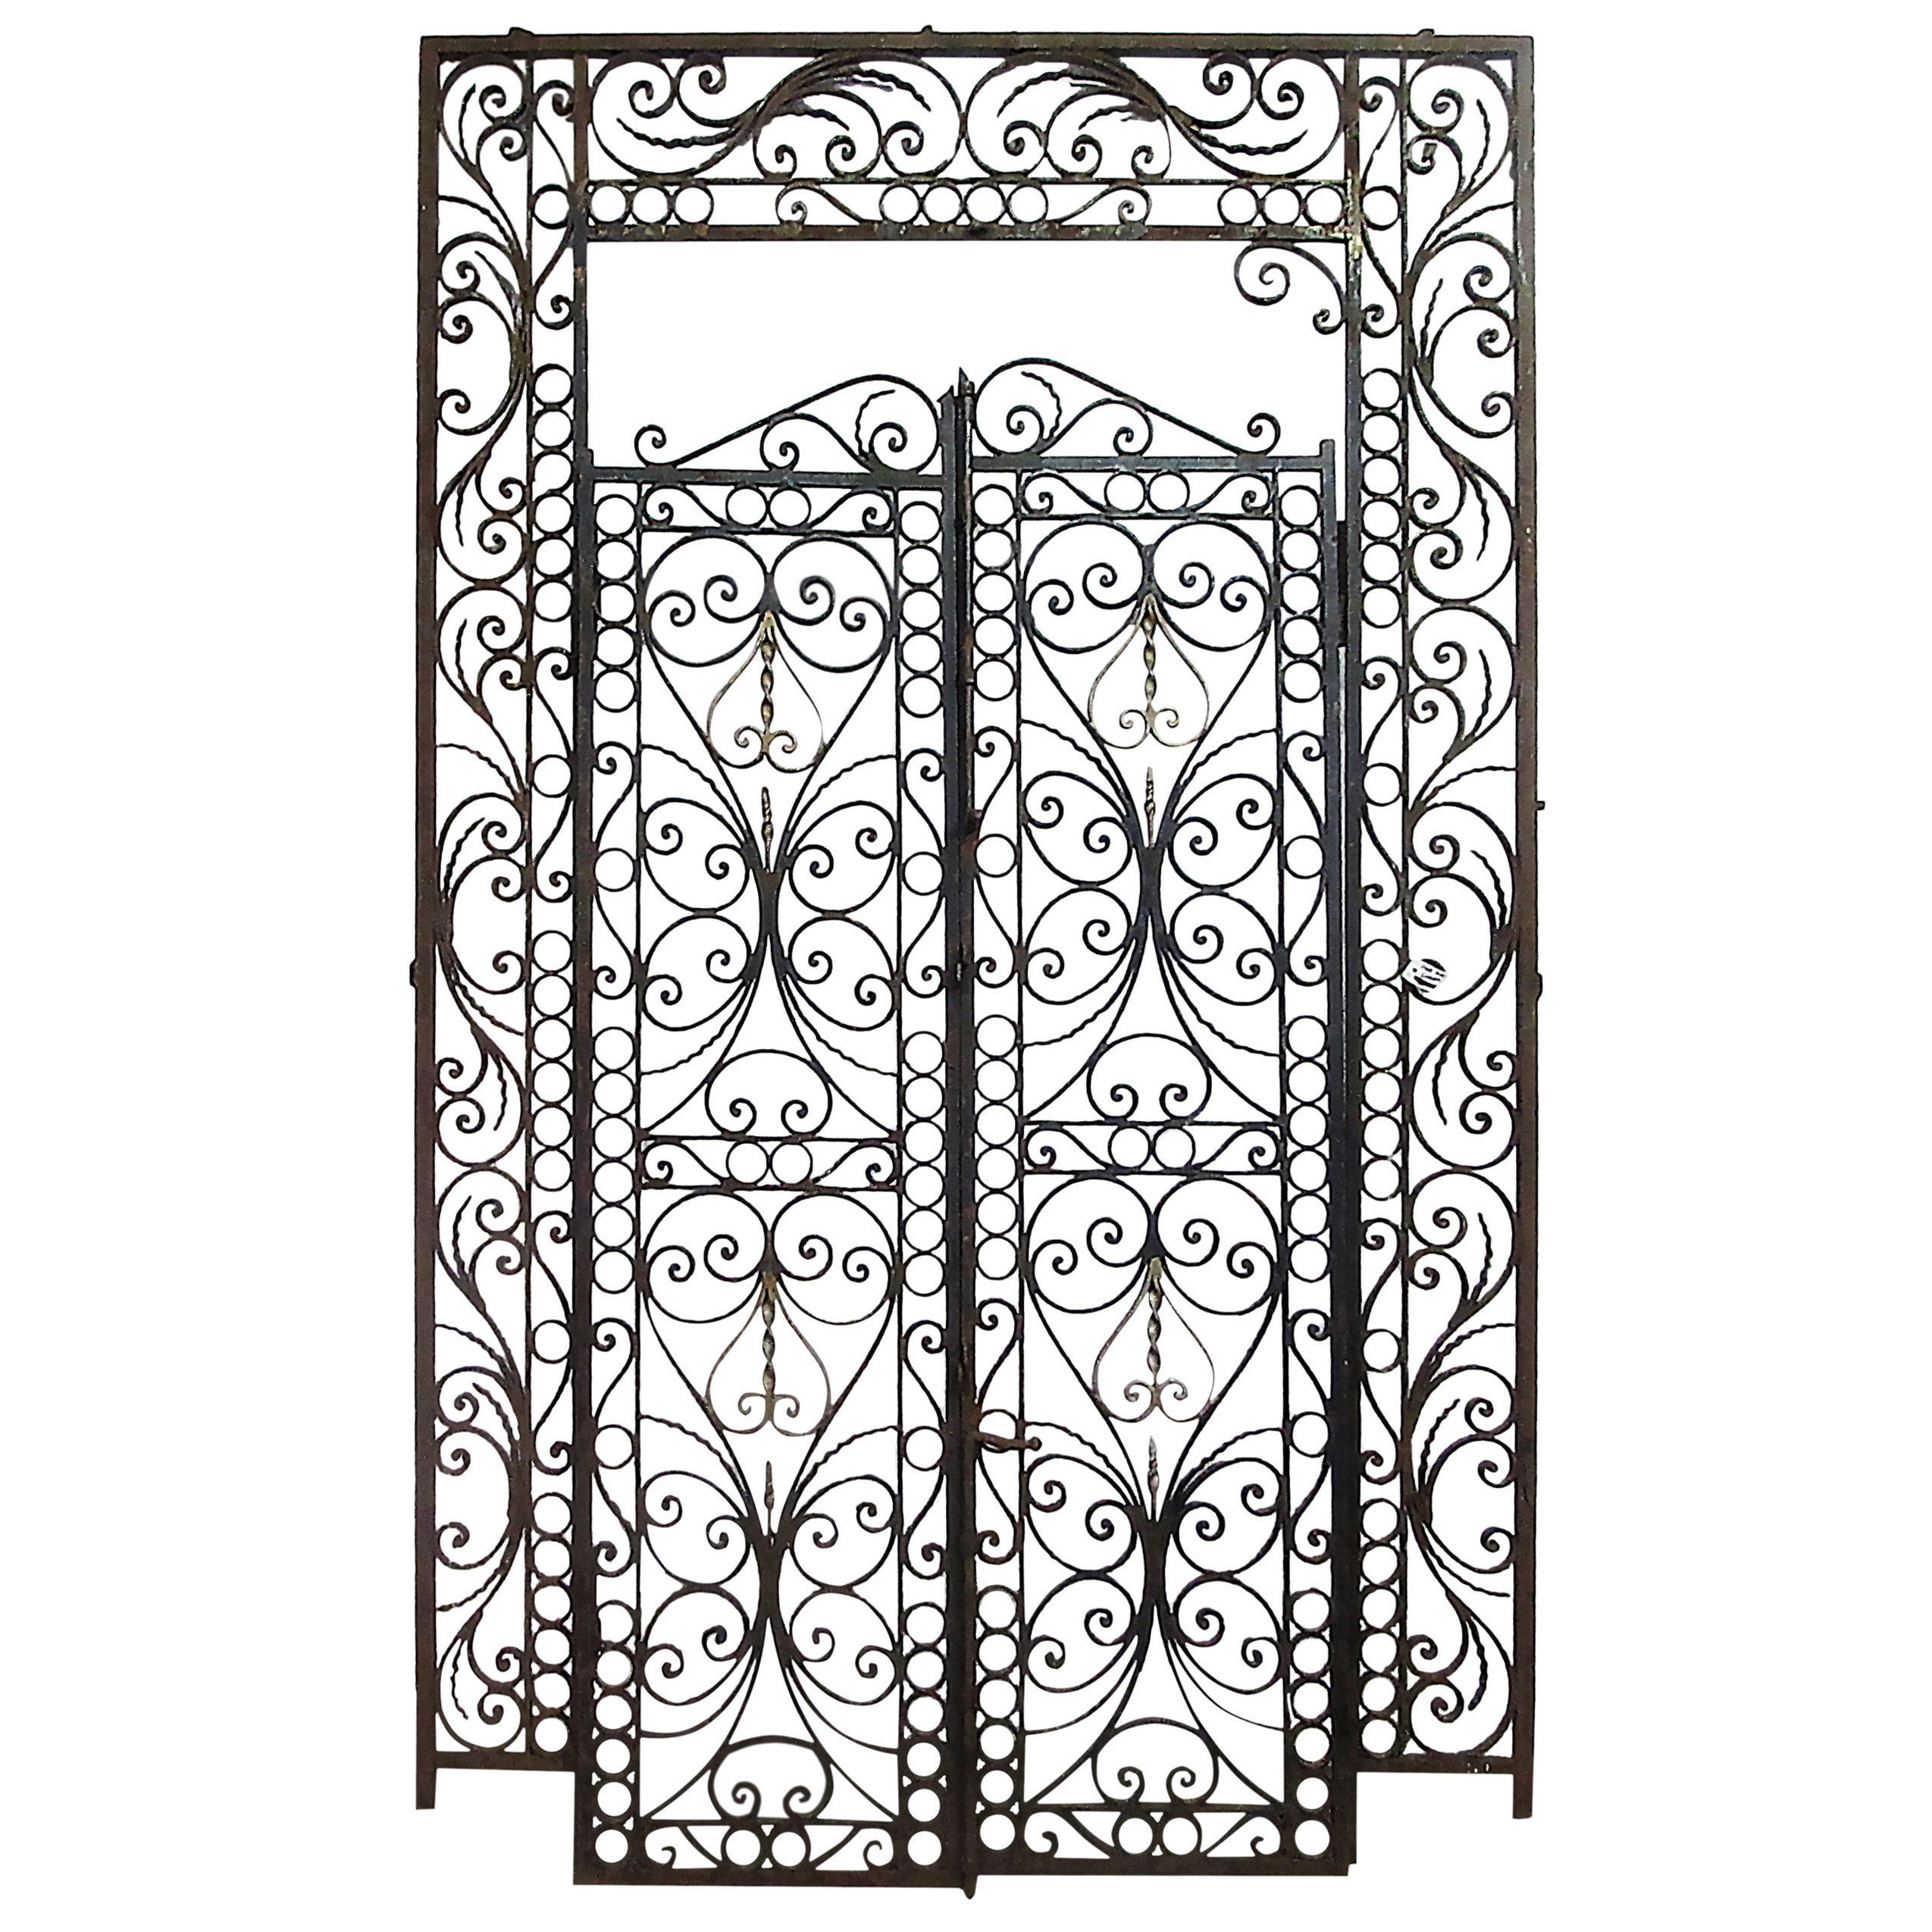 1950s Highly Ornate Wrought Iron Entry Gates with Surround